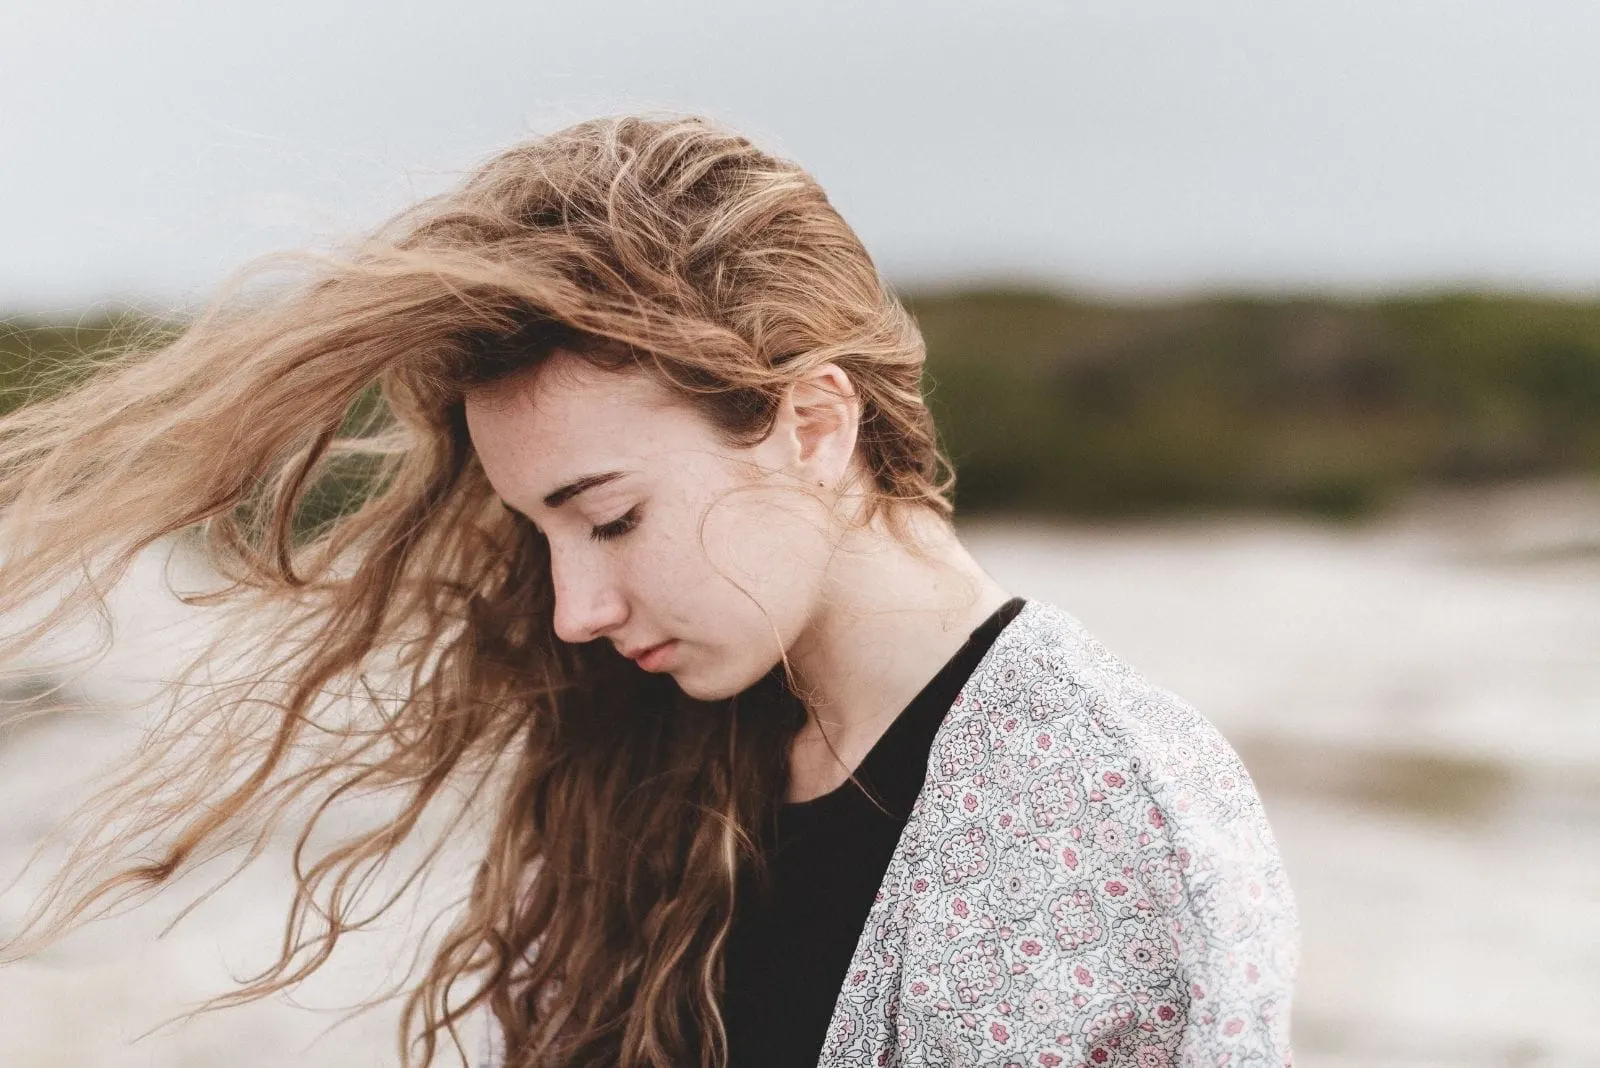 sideview of a young pensive sad woman with hair blown by the wind walking outdoors